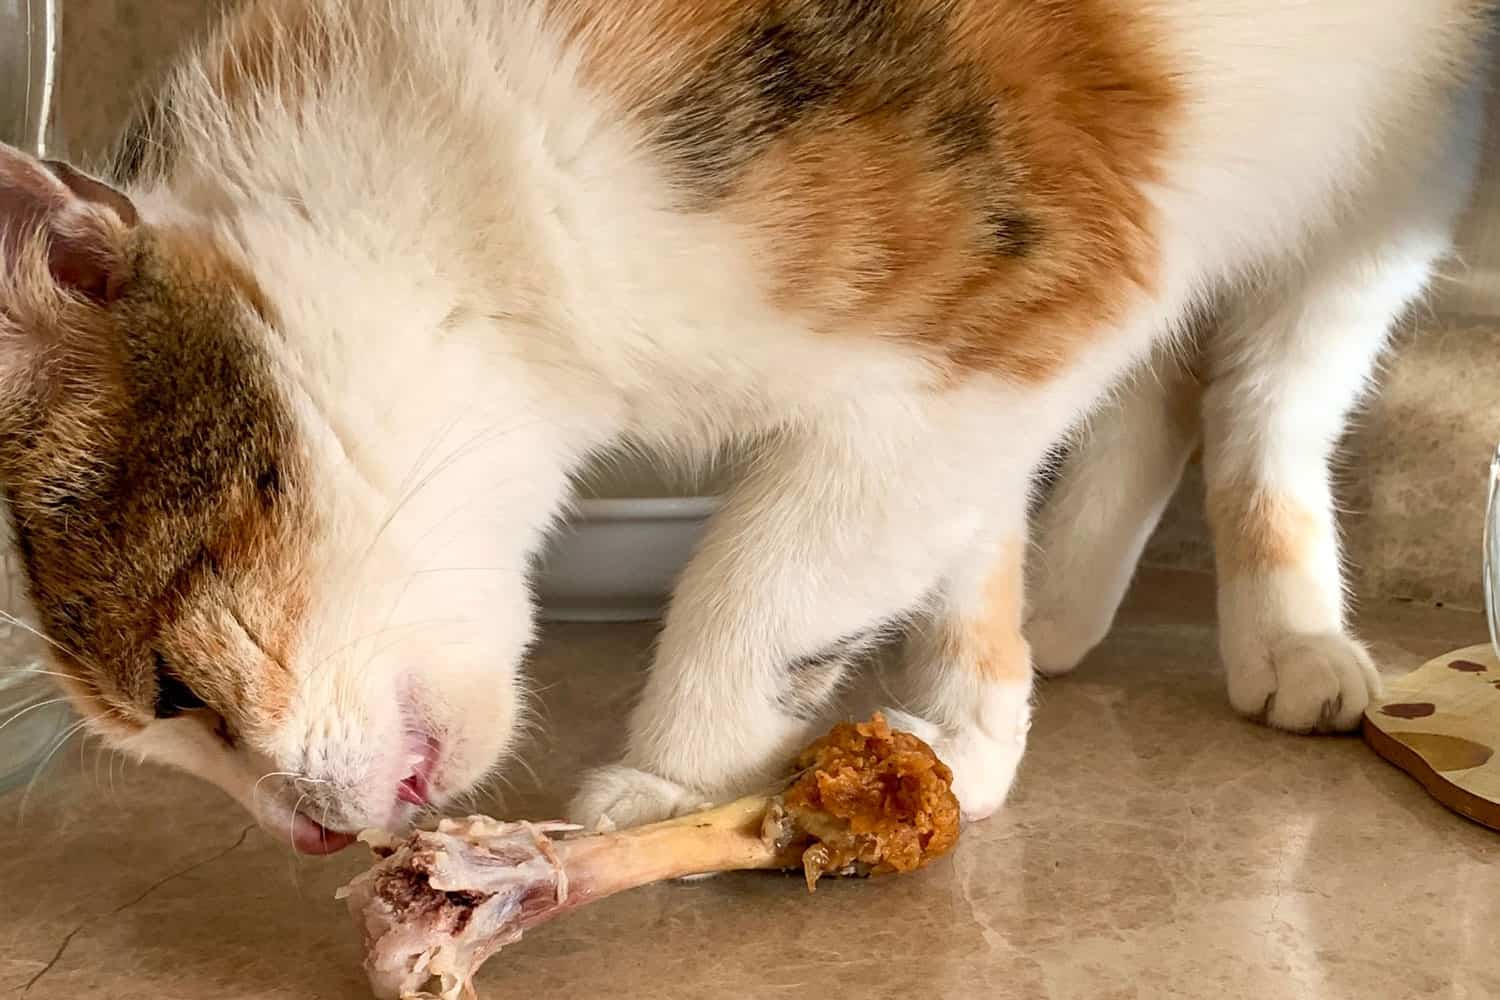 The cat eats a chicken bone on the kitchen counter. The cat's favorite food is chicken legs. A beautiful cat is eating chicken. Delicious chicken legs to eat for the cat.
